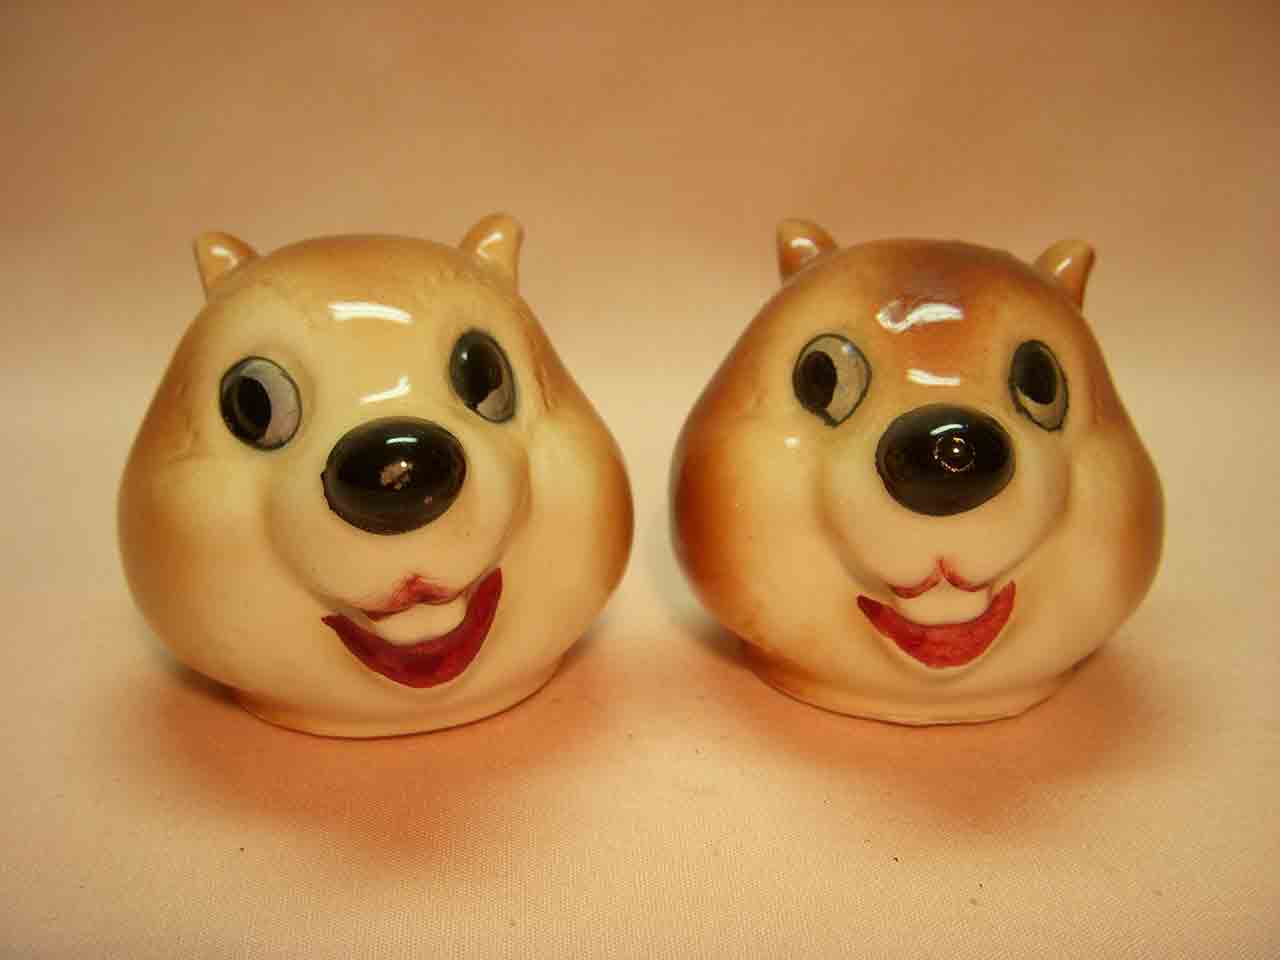 Characters from MGM Studios salt and pepper shakers - Screwey Squirrel